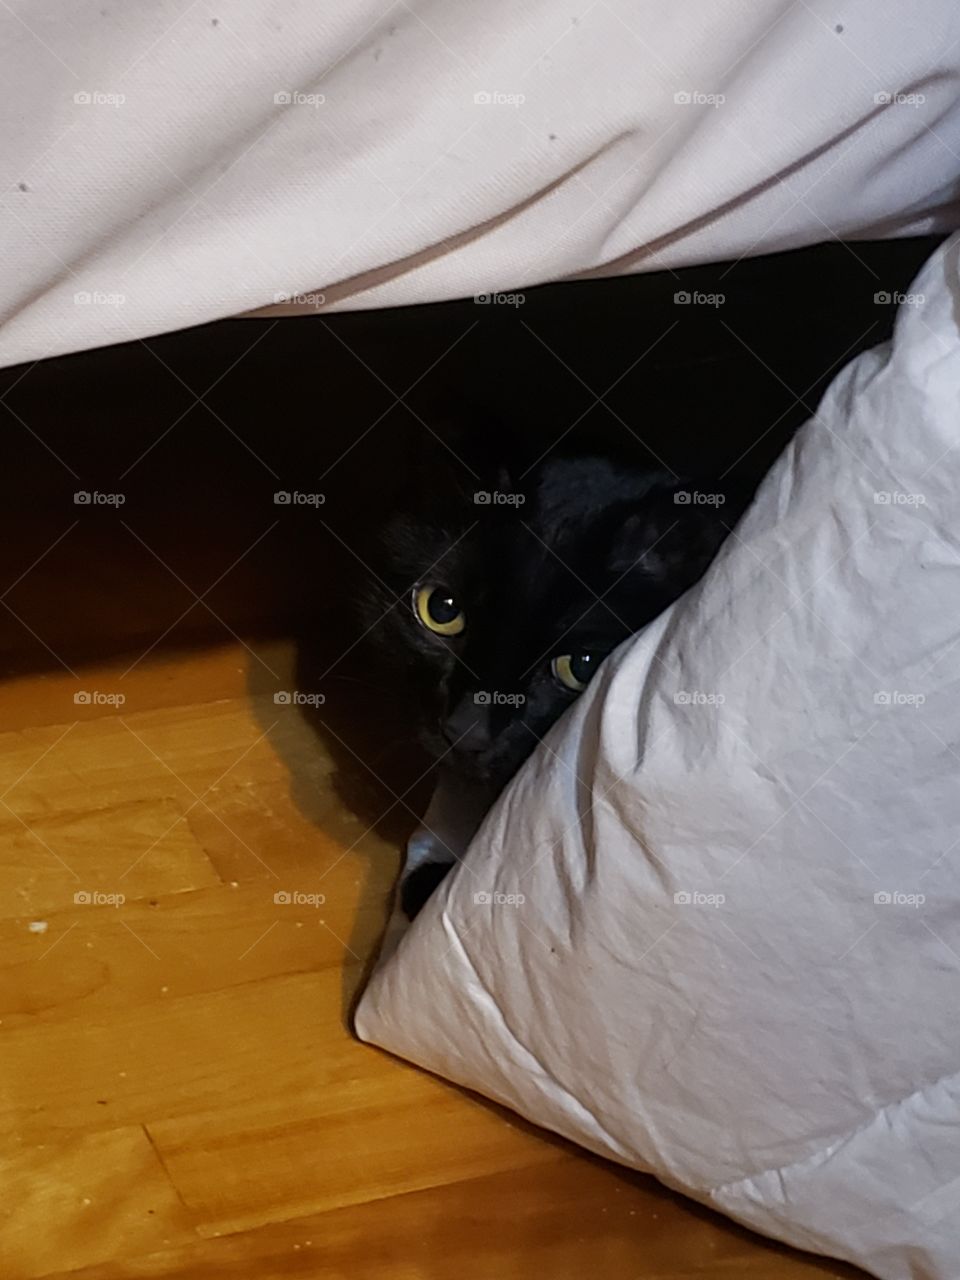 cat peaking out from under the bed